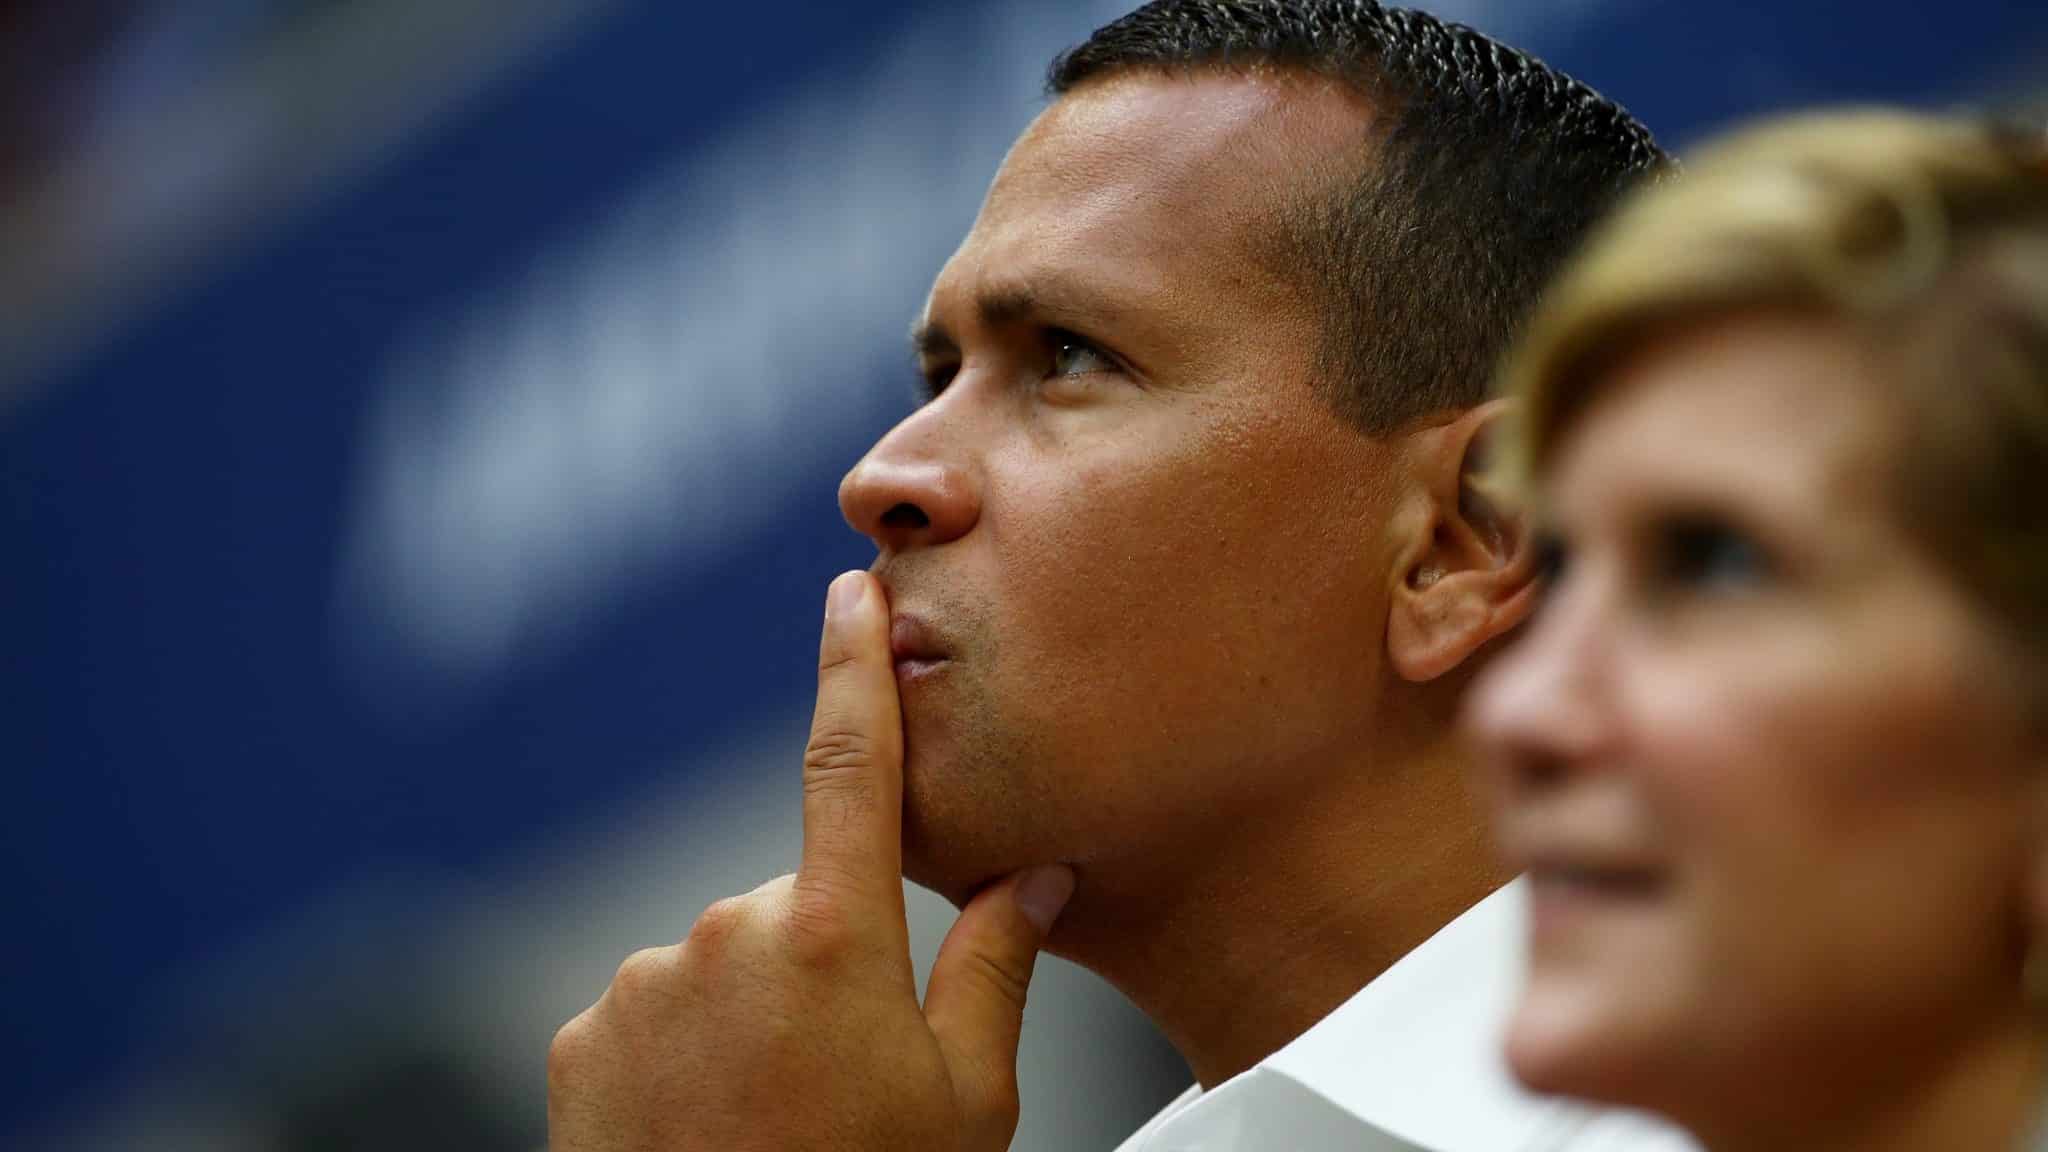 NEW YORK, NY - SEPTEMBER 10: Major League Baseball Player Alex Rodriguez of the New York Yankees attends the Women's Singles Final Match between Karolina Pliskova of the Czech Republic and Angelique Kerber of Germany on Day Thirteen of the 2016 US Open at the USTA Billie Jean King National Tennis Center on September 10, 2016 in the Flushing neighborhood of the Queens borough of New York City.